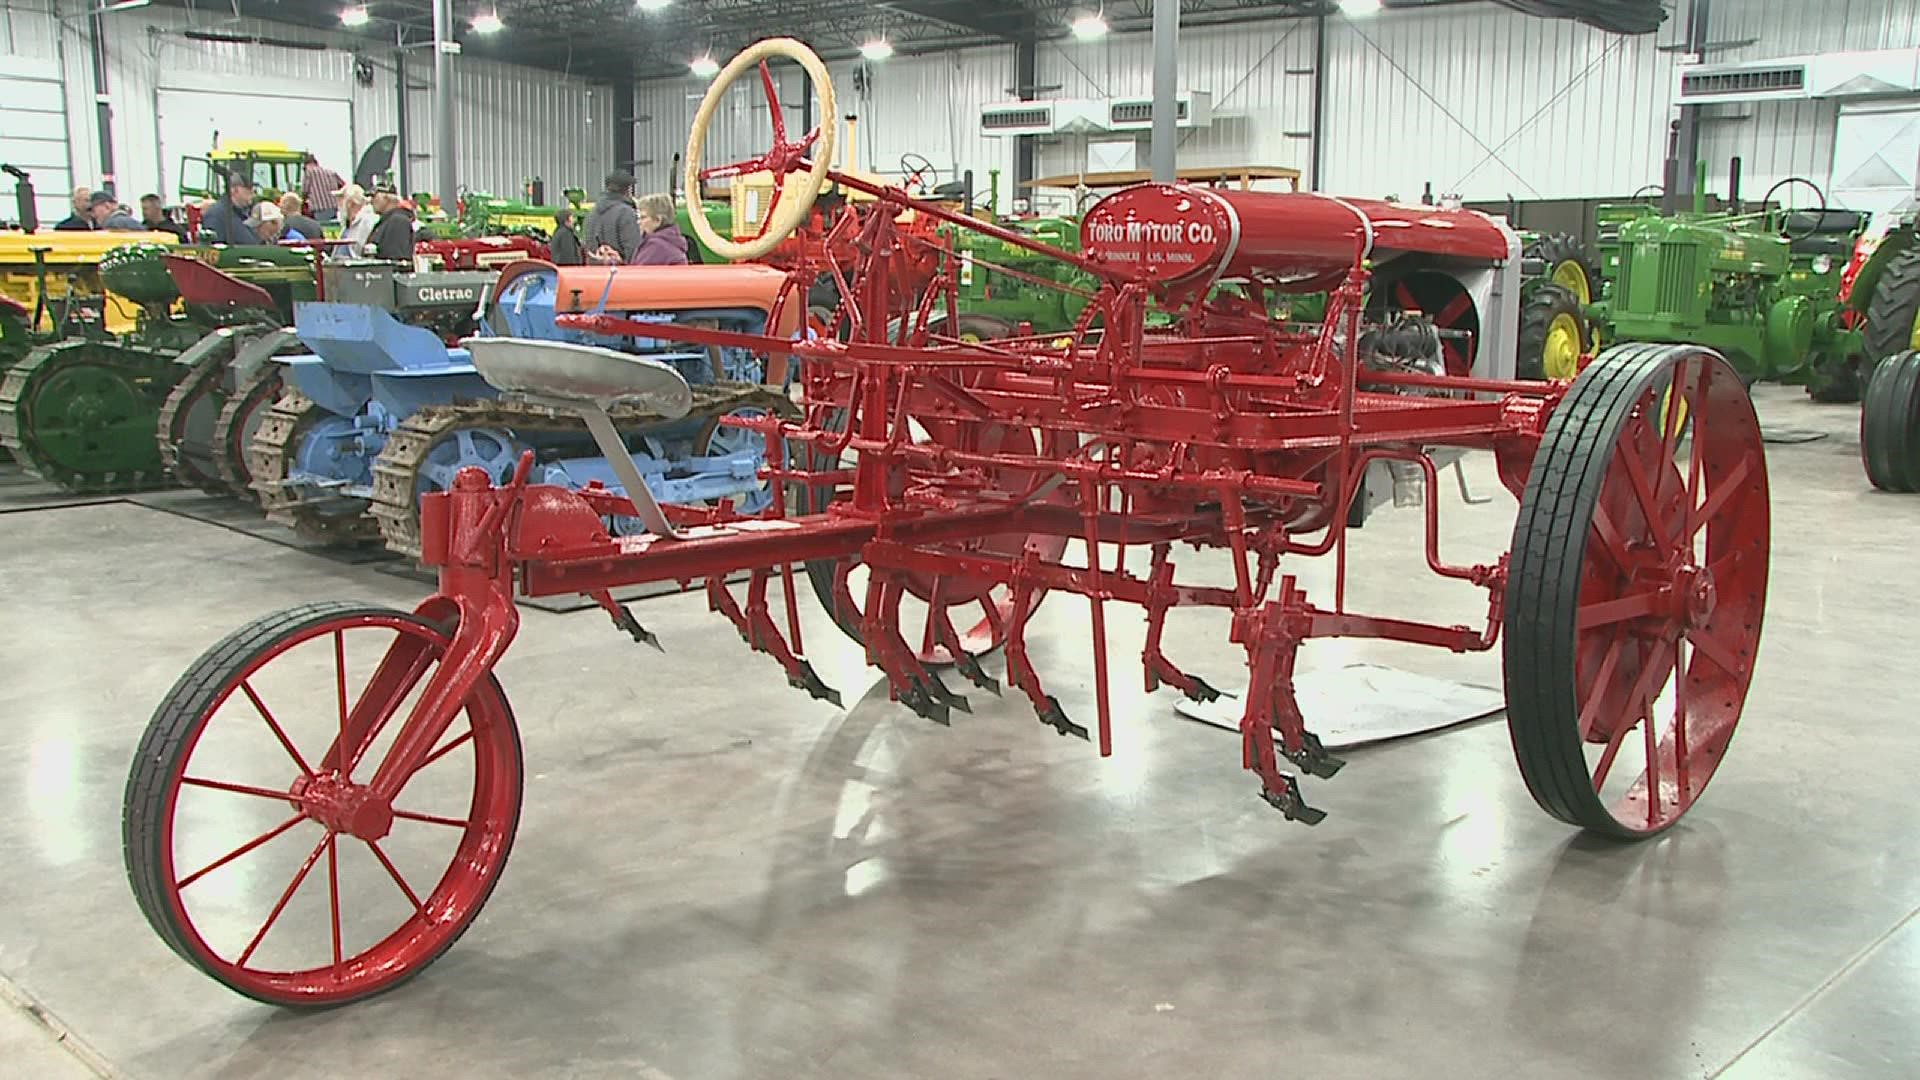 The classic Gone Farmin' spring auction kicked the tires on a special previewing Thursday at the Bend Expo Center in East Moline.